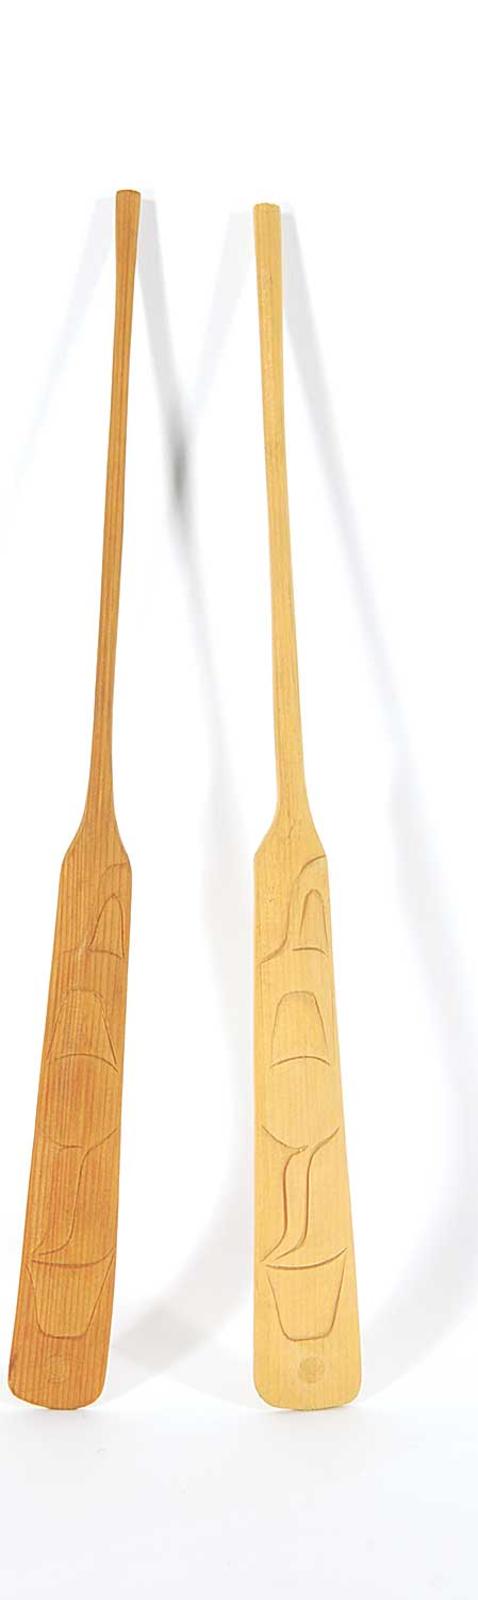 First Nations Basket School - Two Miniature Oars with Carved Designs